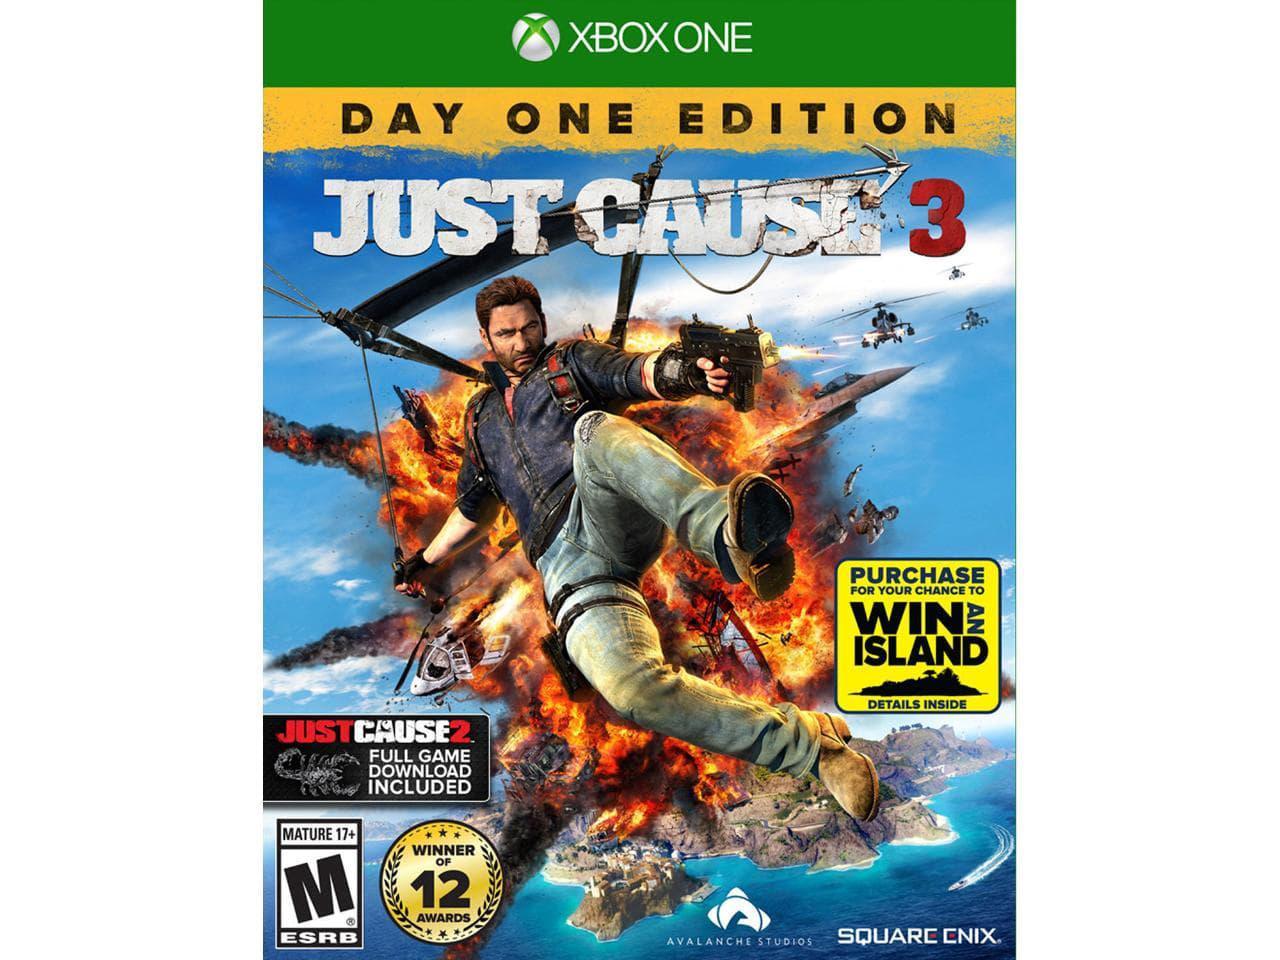 are all just cause 3 for pc day one edition